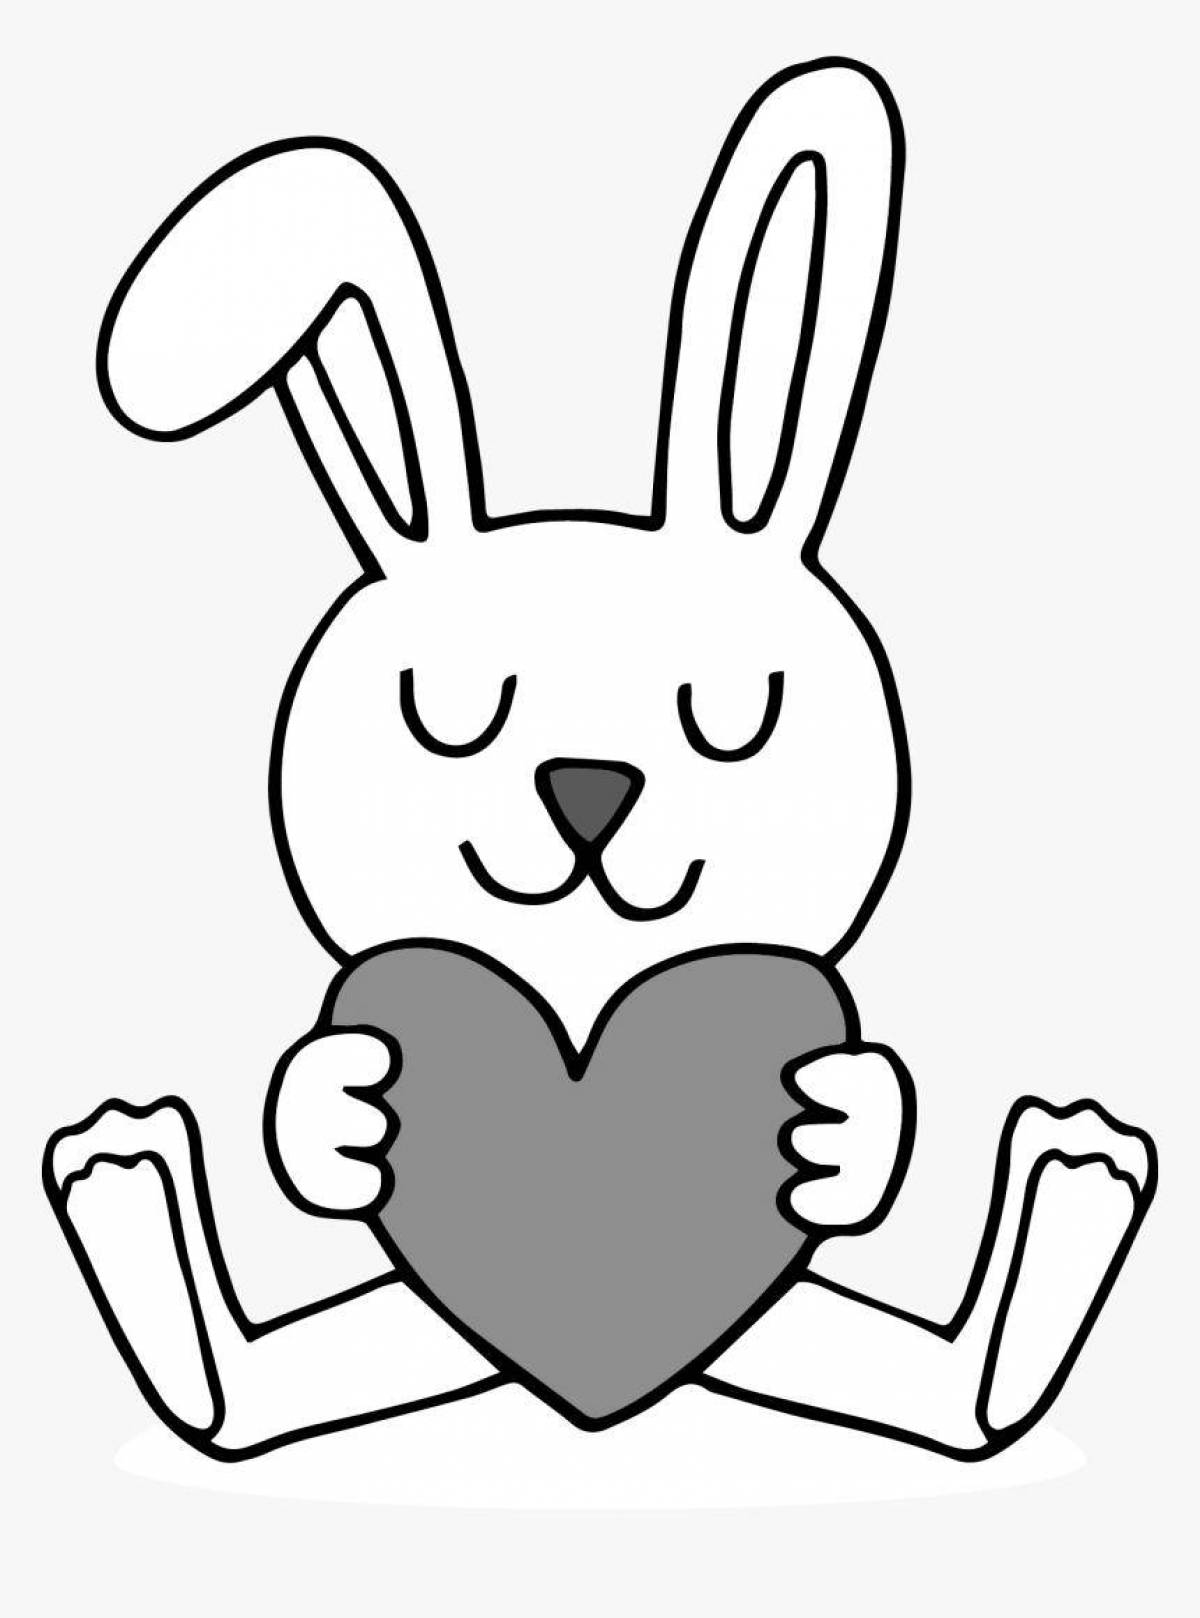 Coloring book glowing rabbit with a heart